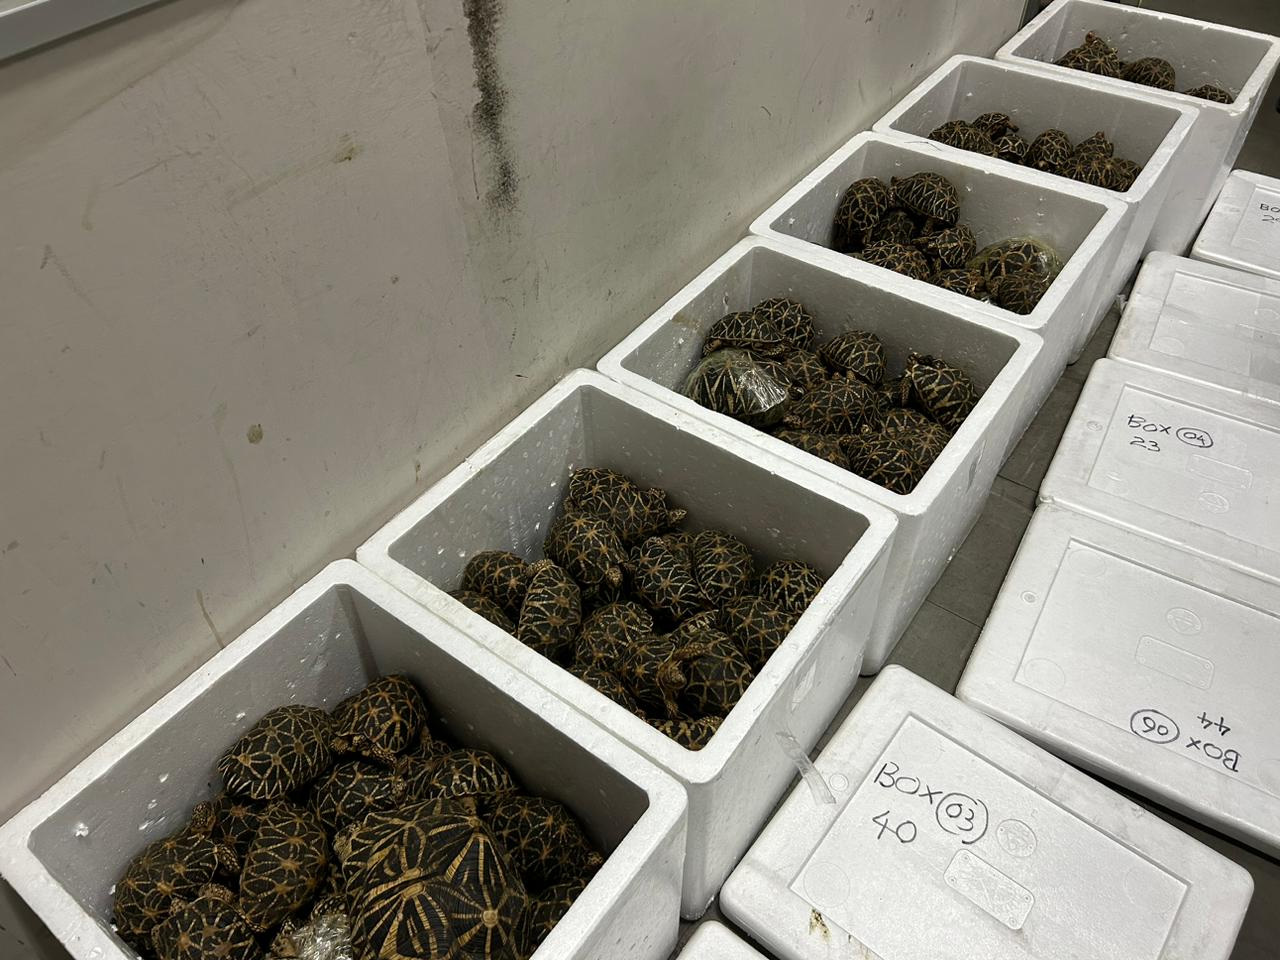 Over 200 endangered tortoises labelled dried seafood seized at BIA 